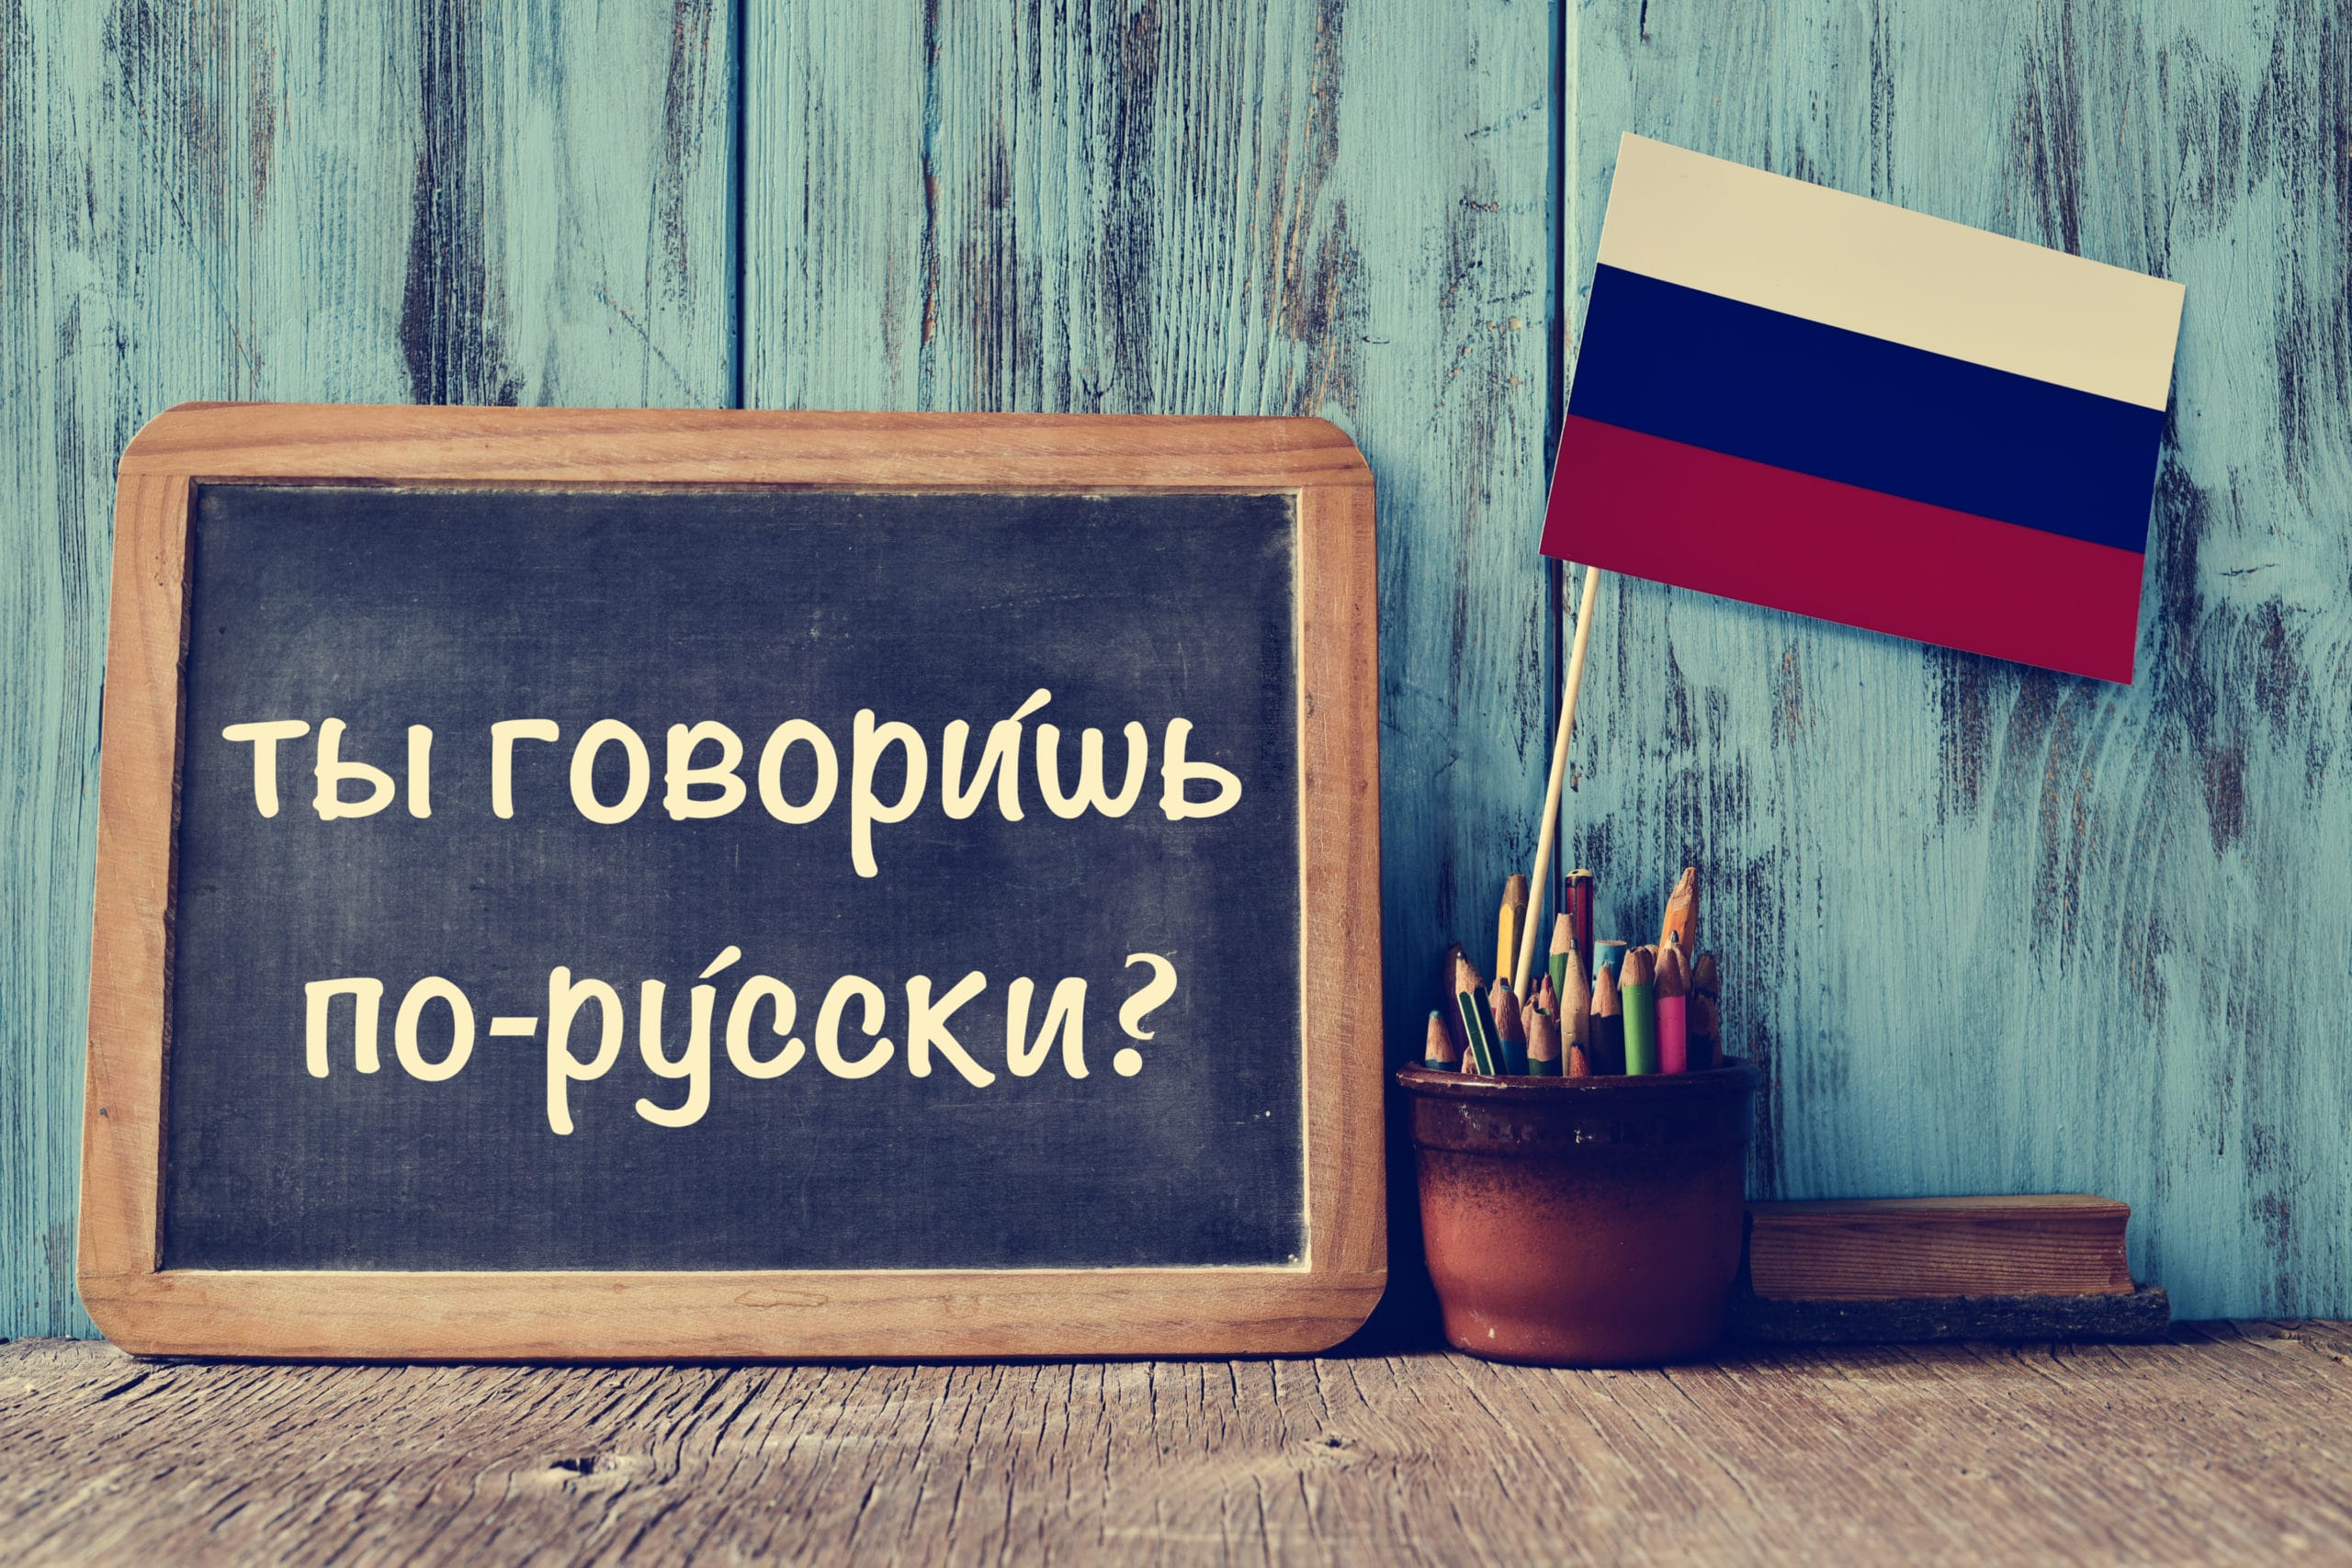 Basic Russian for Beginners